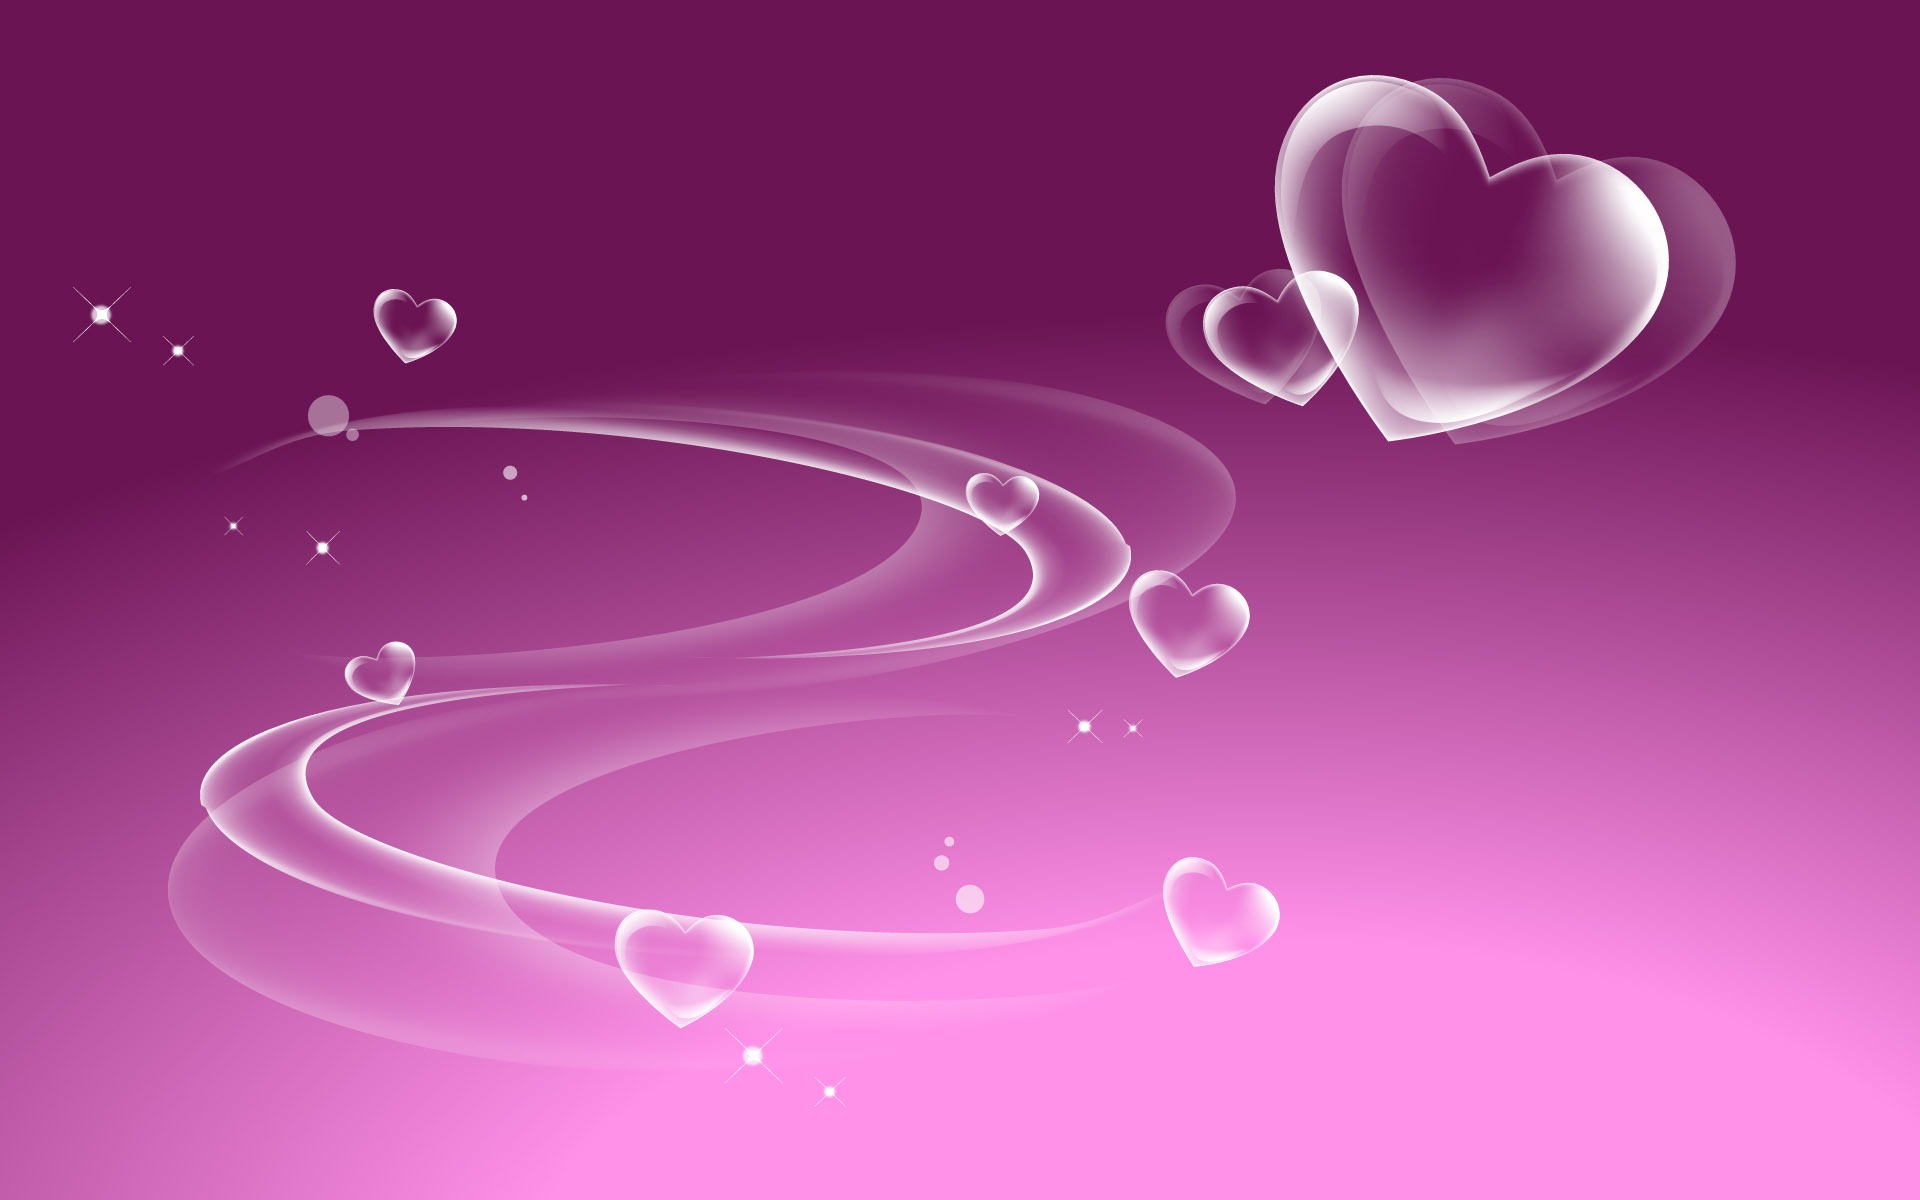 Valentine's Day Love Theme Wallpapers (2) #2 - 1920x1200